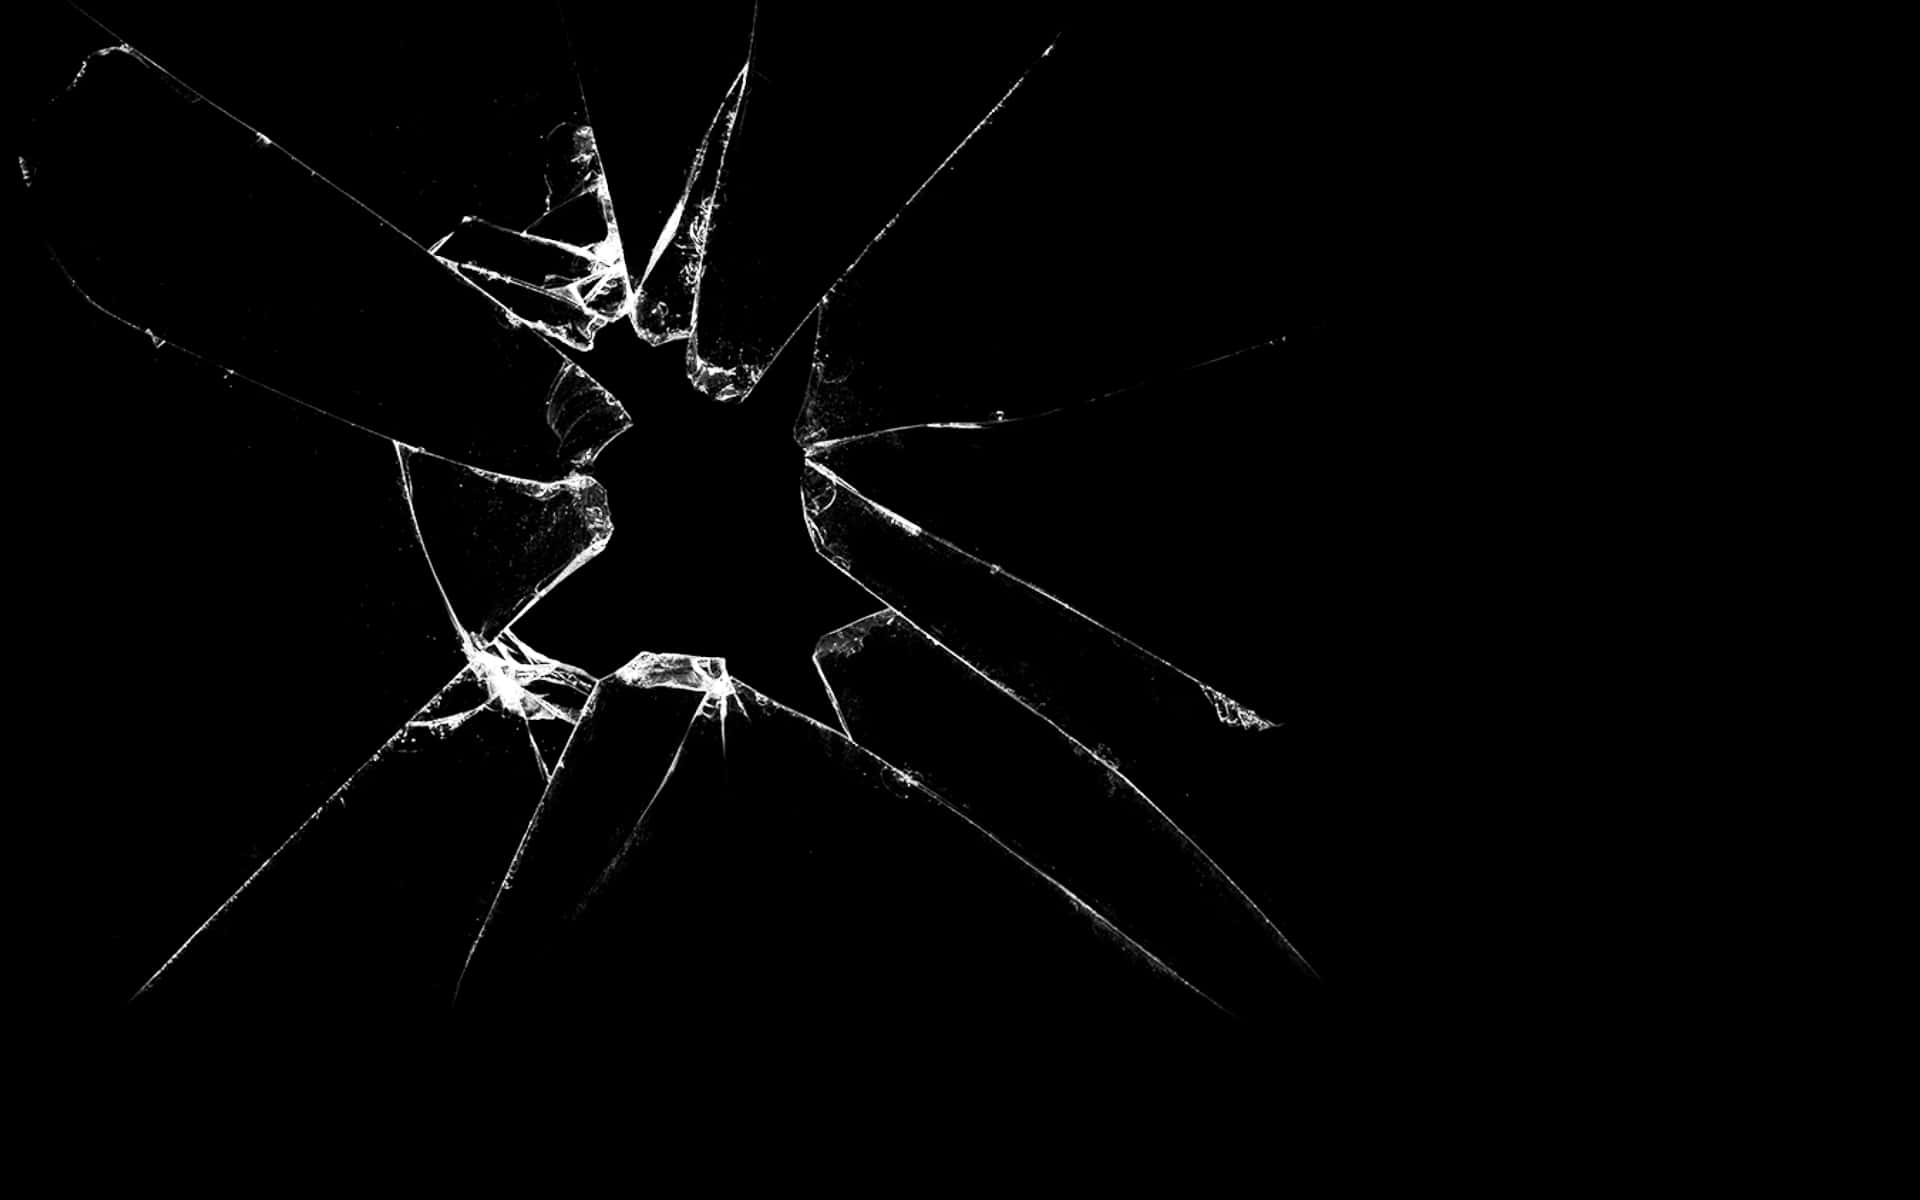 A Black And White Image Of A Broken Glass